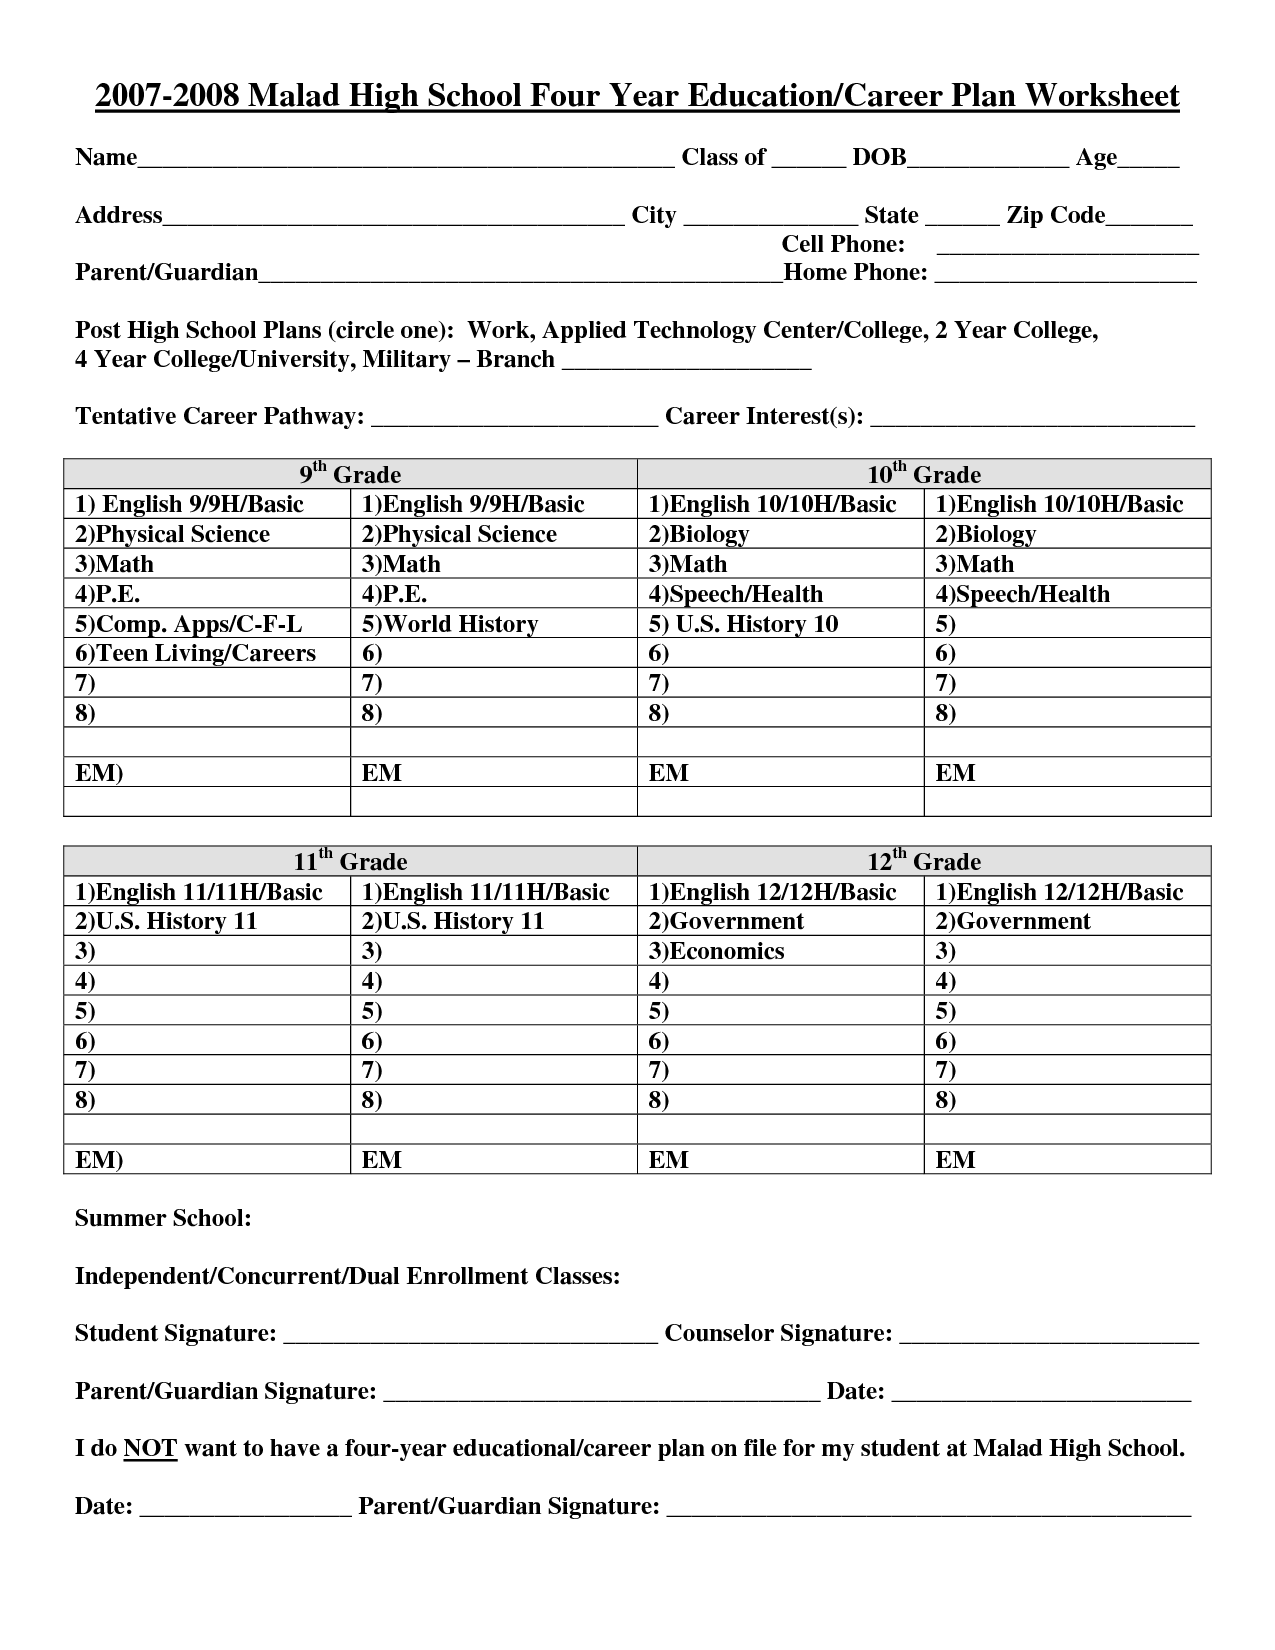 15-best-images-of-four-year-college-plan-worksheet-high-school-four